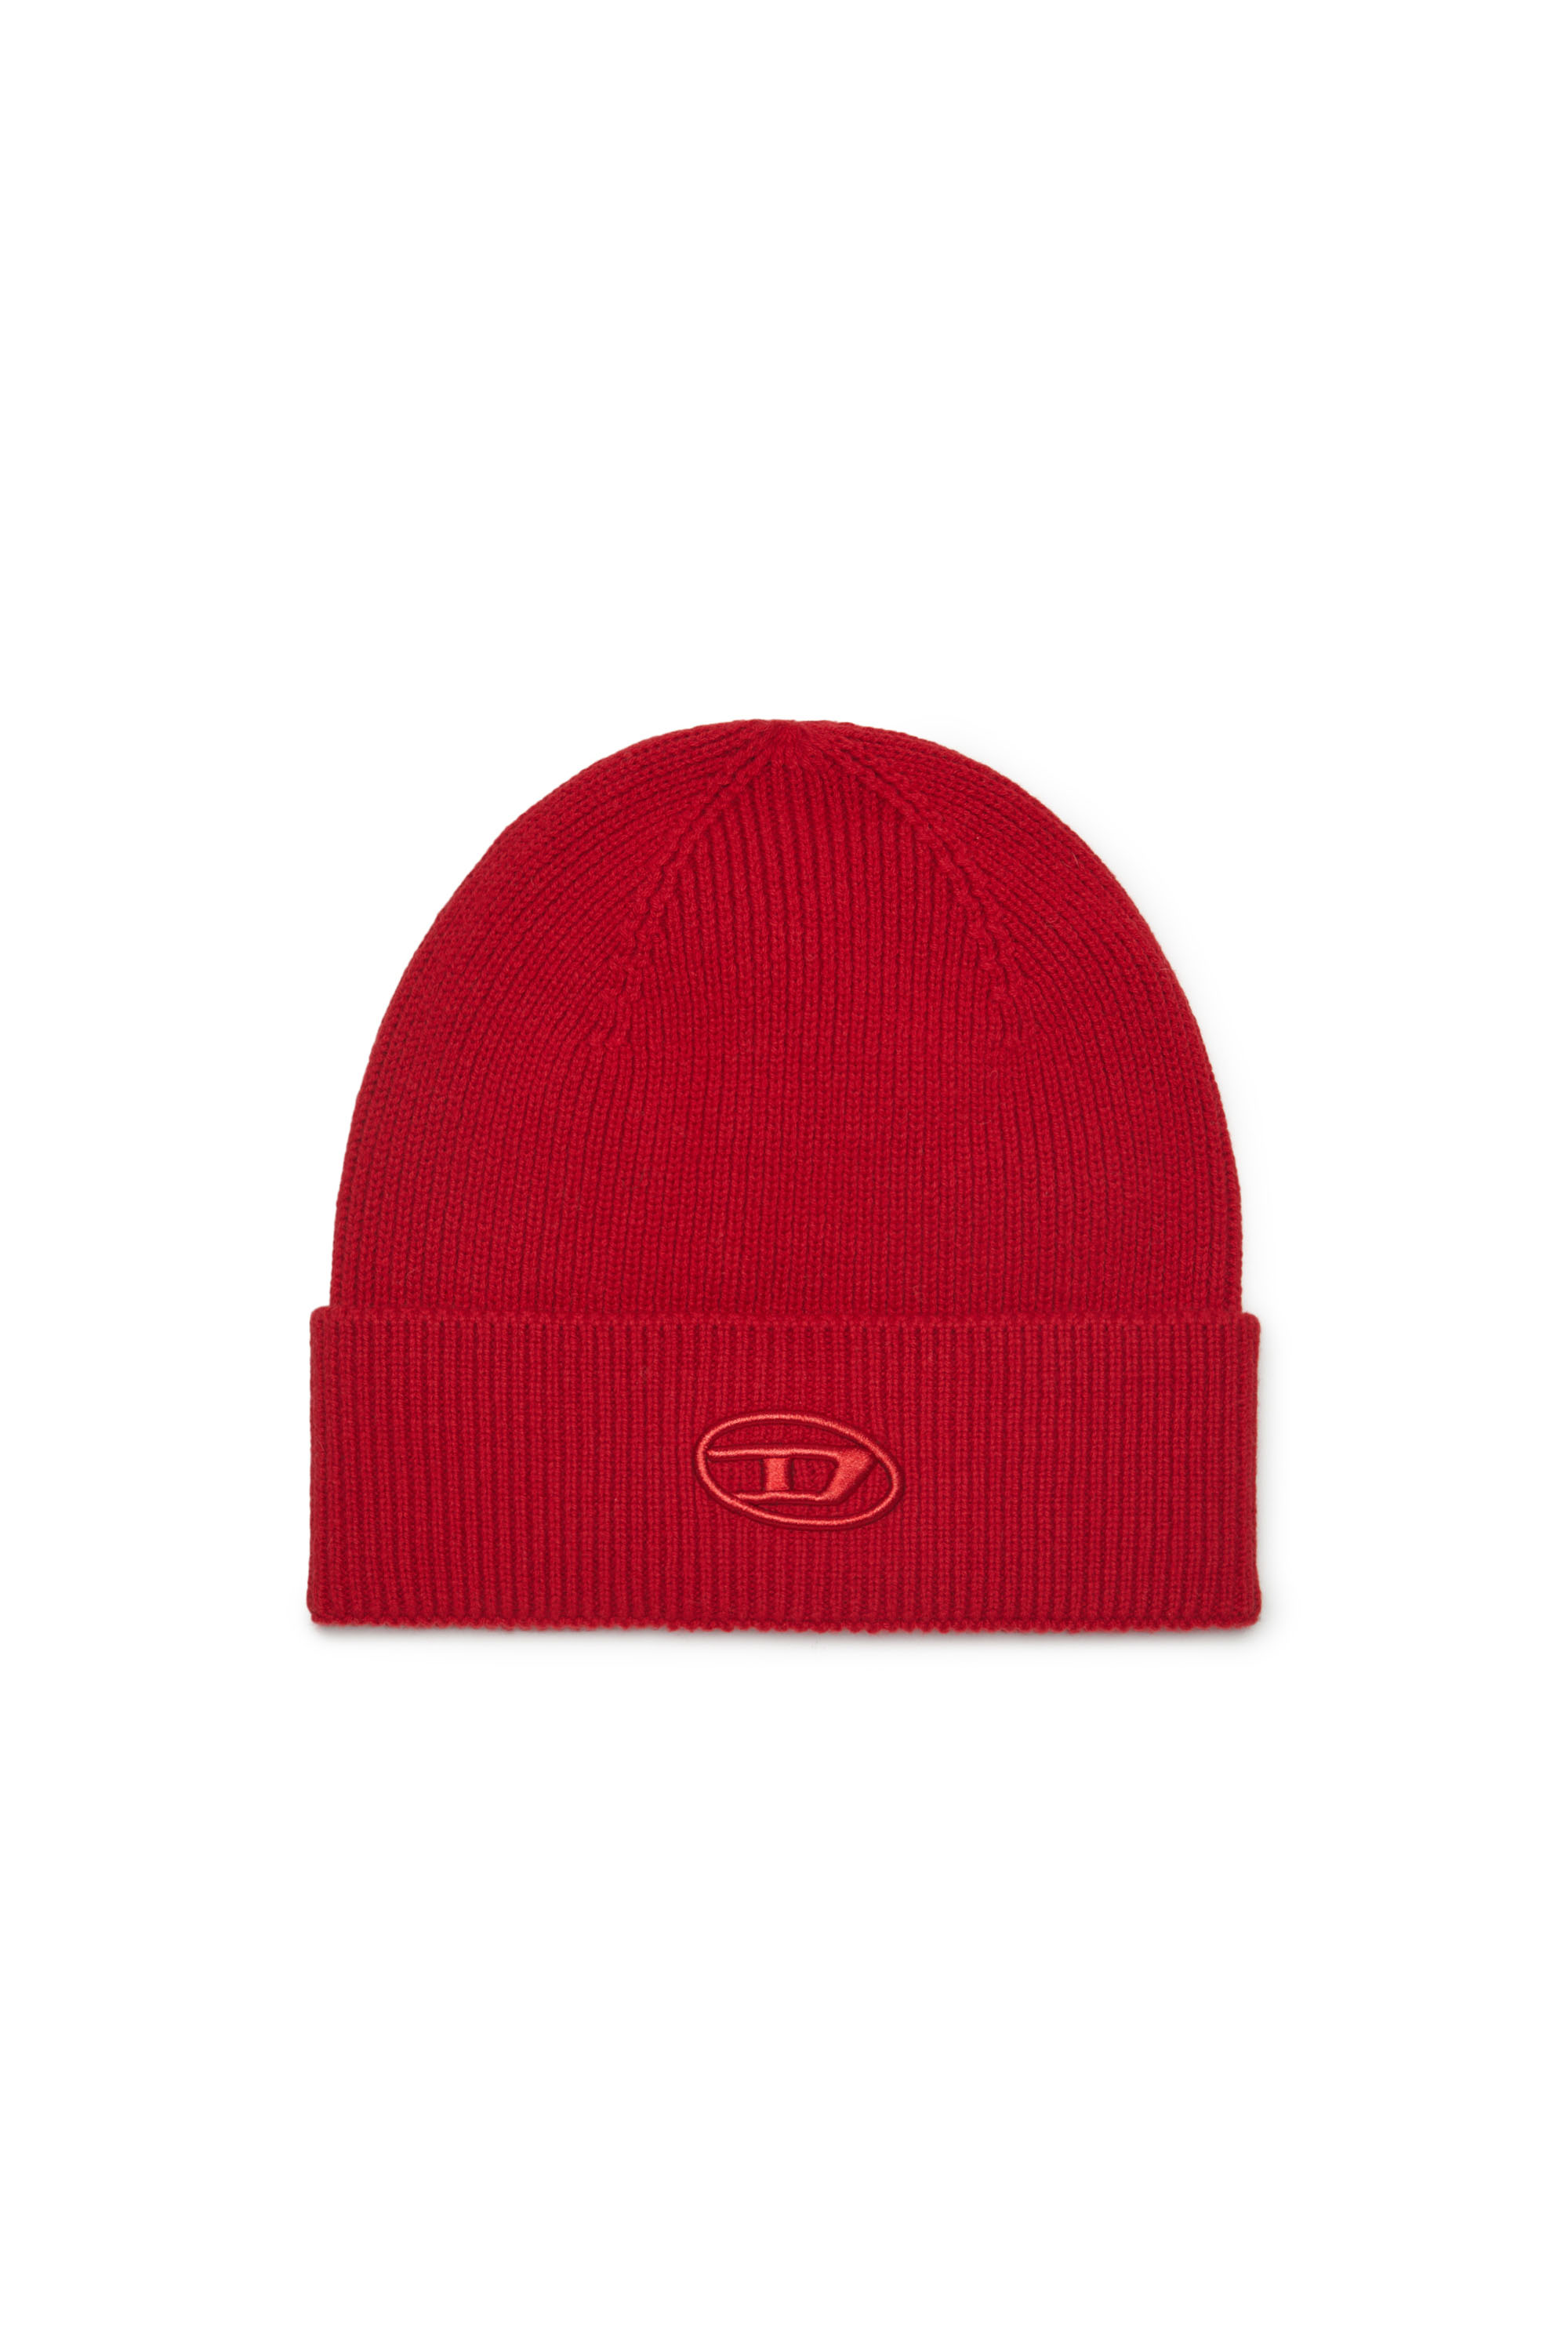 DIESEL RIBBED BEANIE WITH D EMBROIDERY